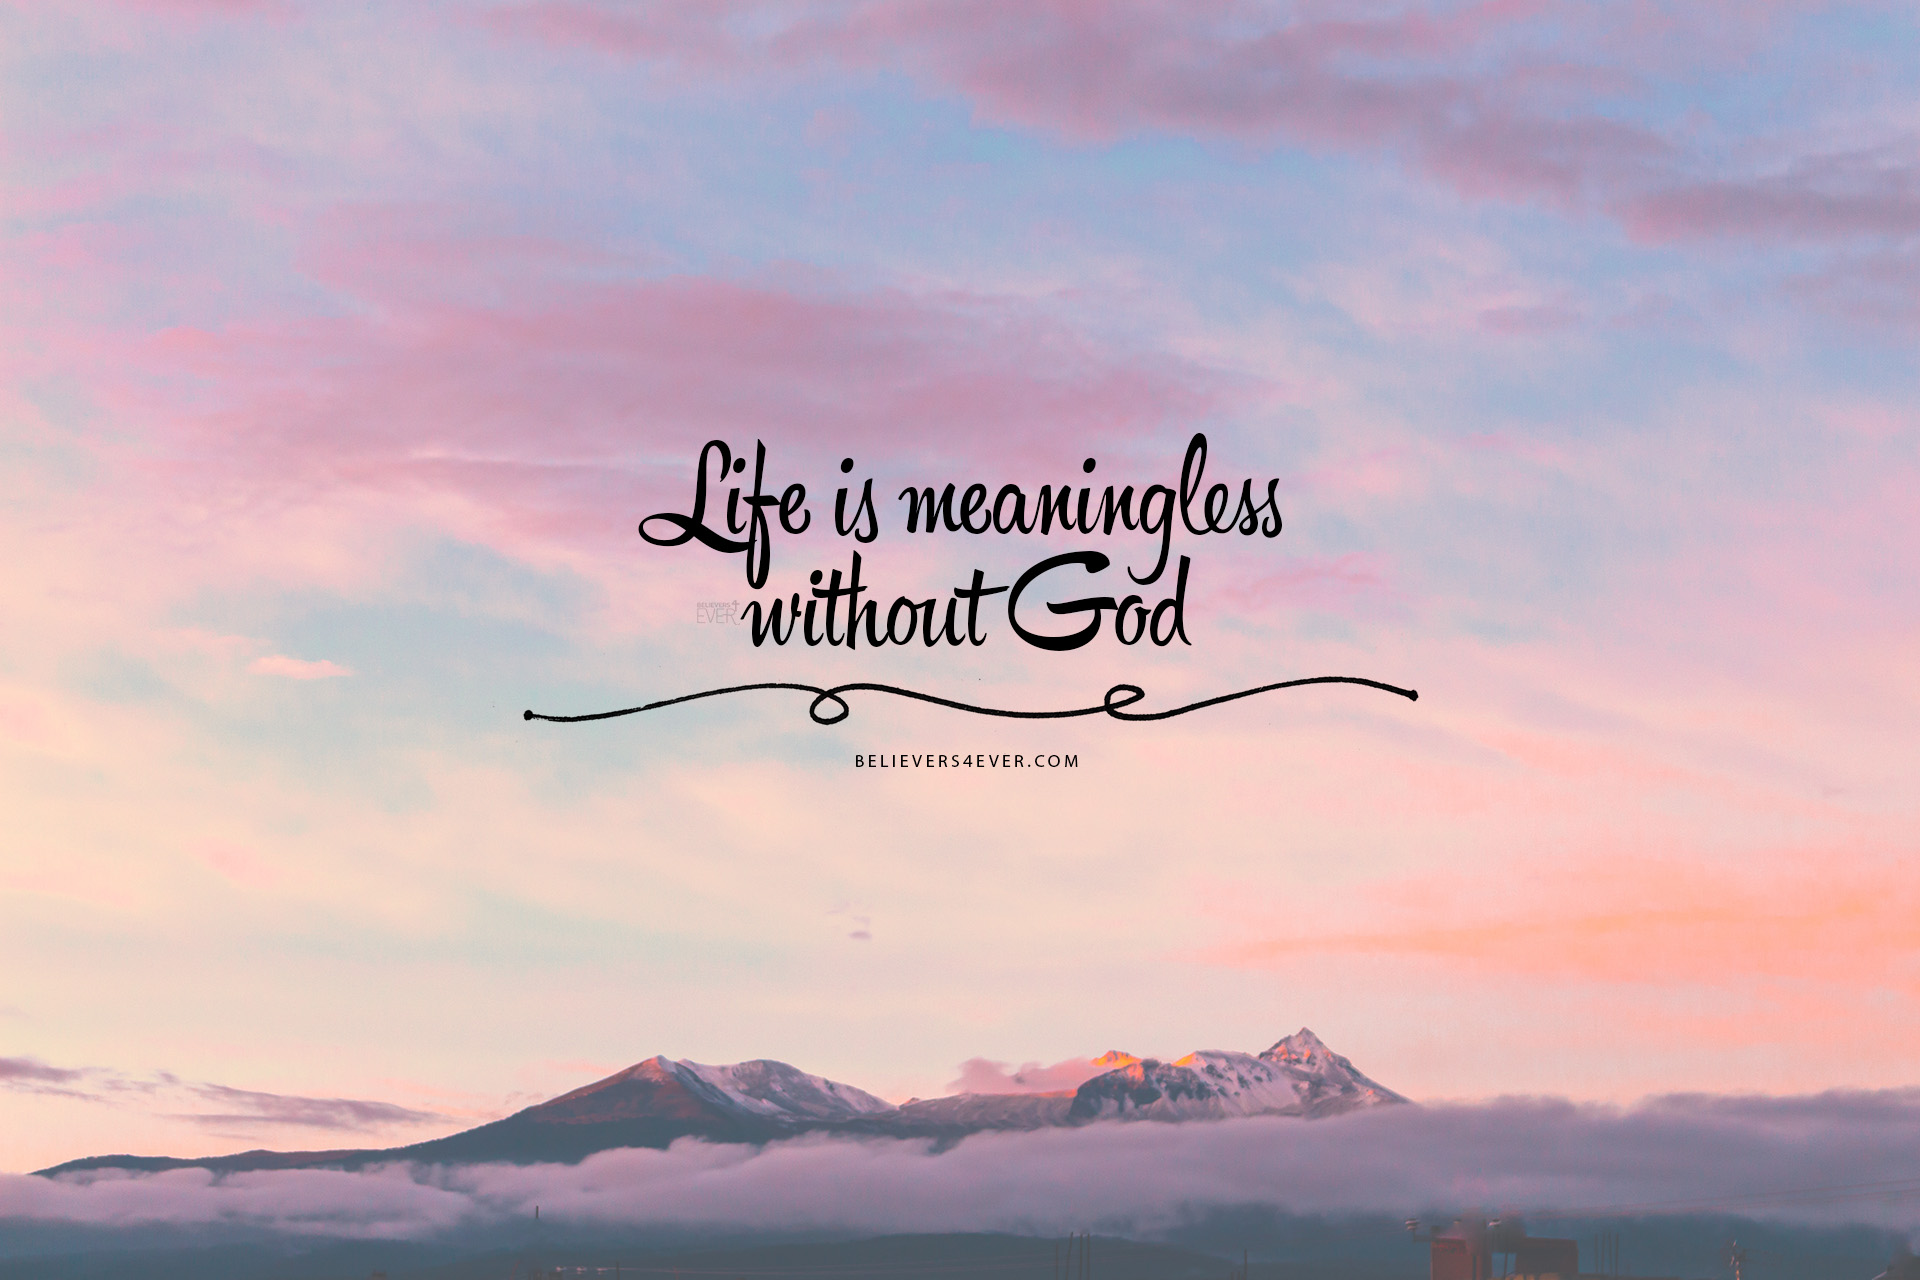 Life Is Meaningless Without God Wallpaper - Desktop Background Bible Verse - HD Wallpaper 